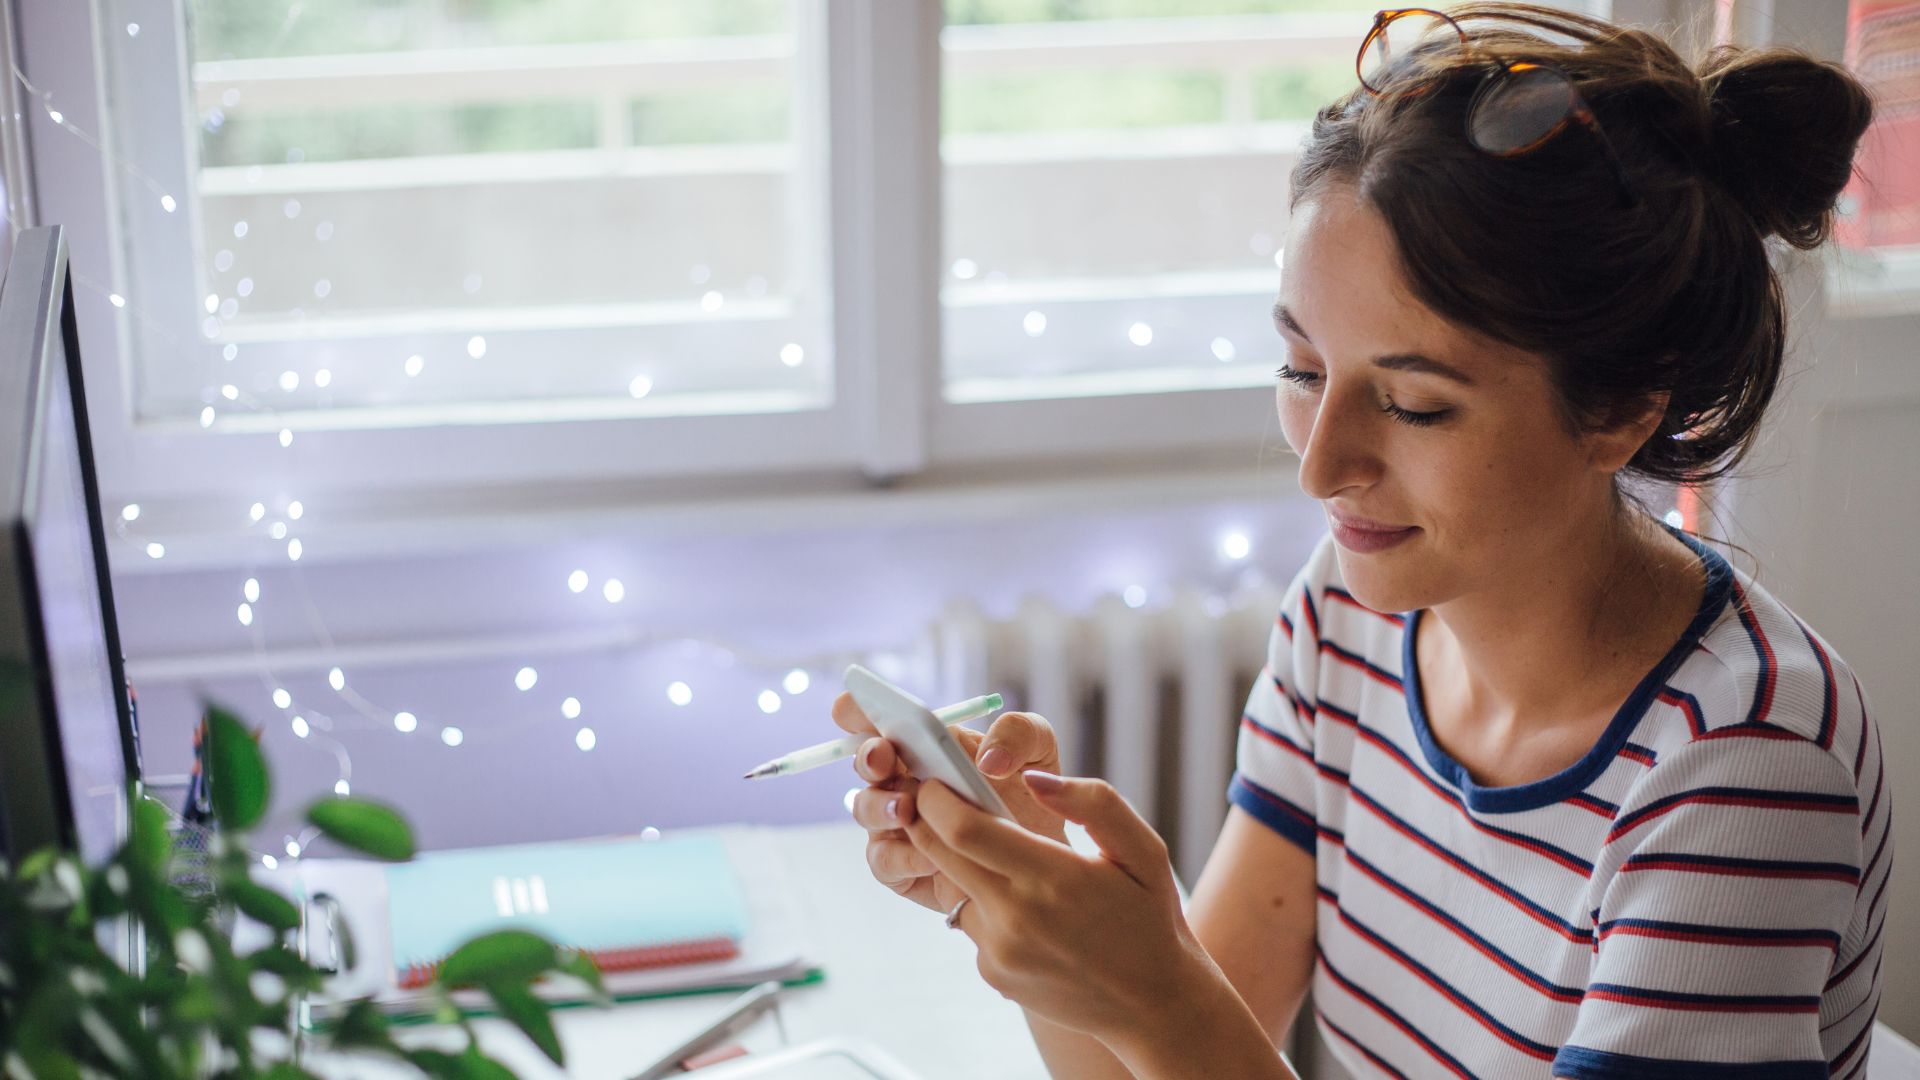 A woman wearing a red and blue striped white t-shirt with a messy bun hairstyle is doing social media management using her cell phone in her aesthetic room decorated with white LED lights.